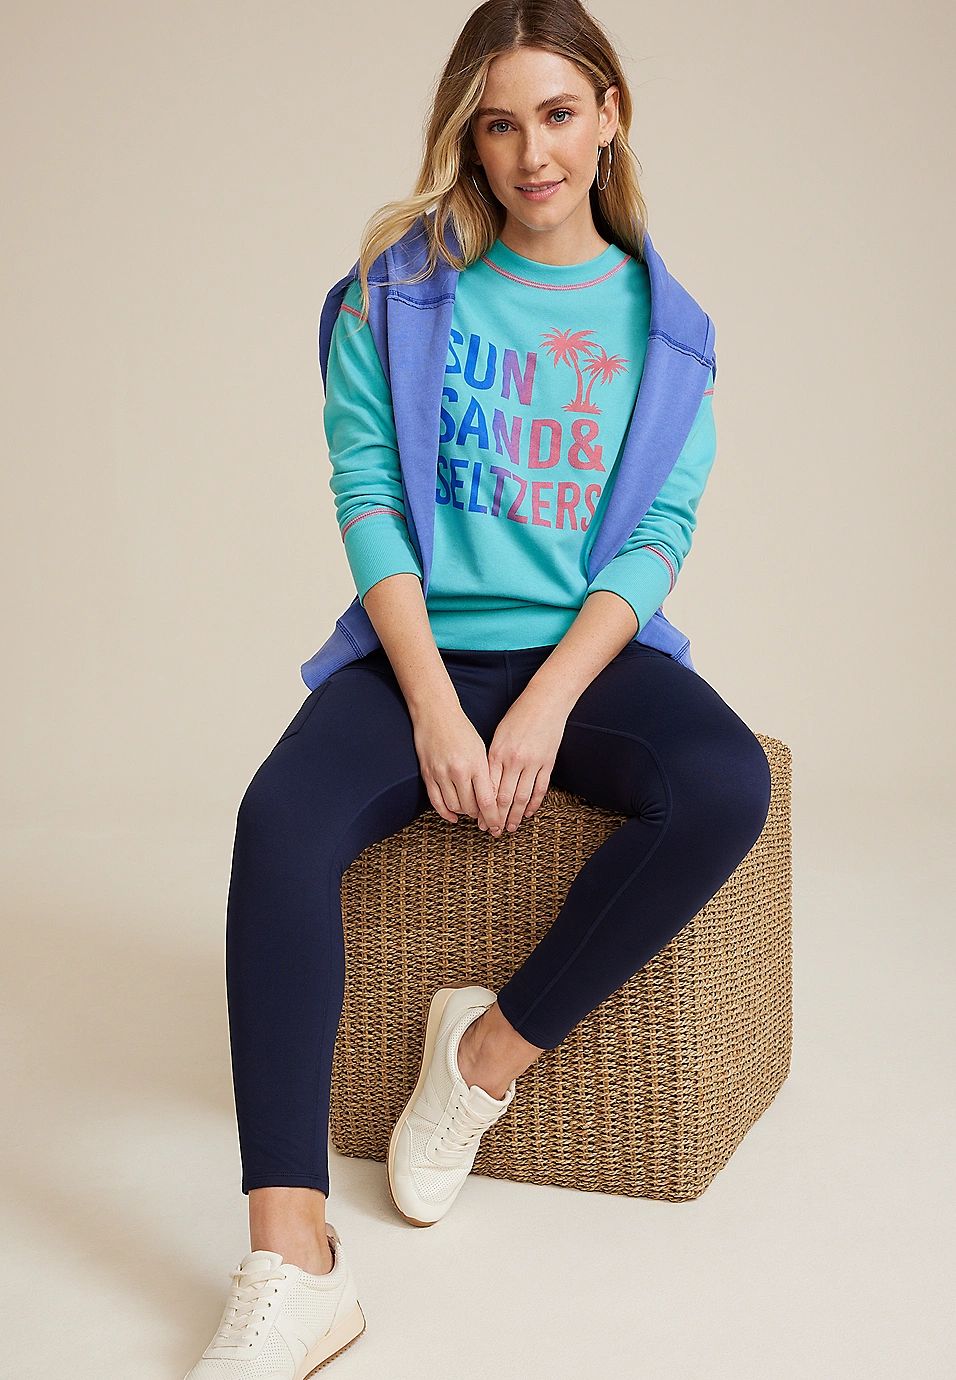 Sun Sand And Seltzers Sweatshirt | Maurices